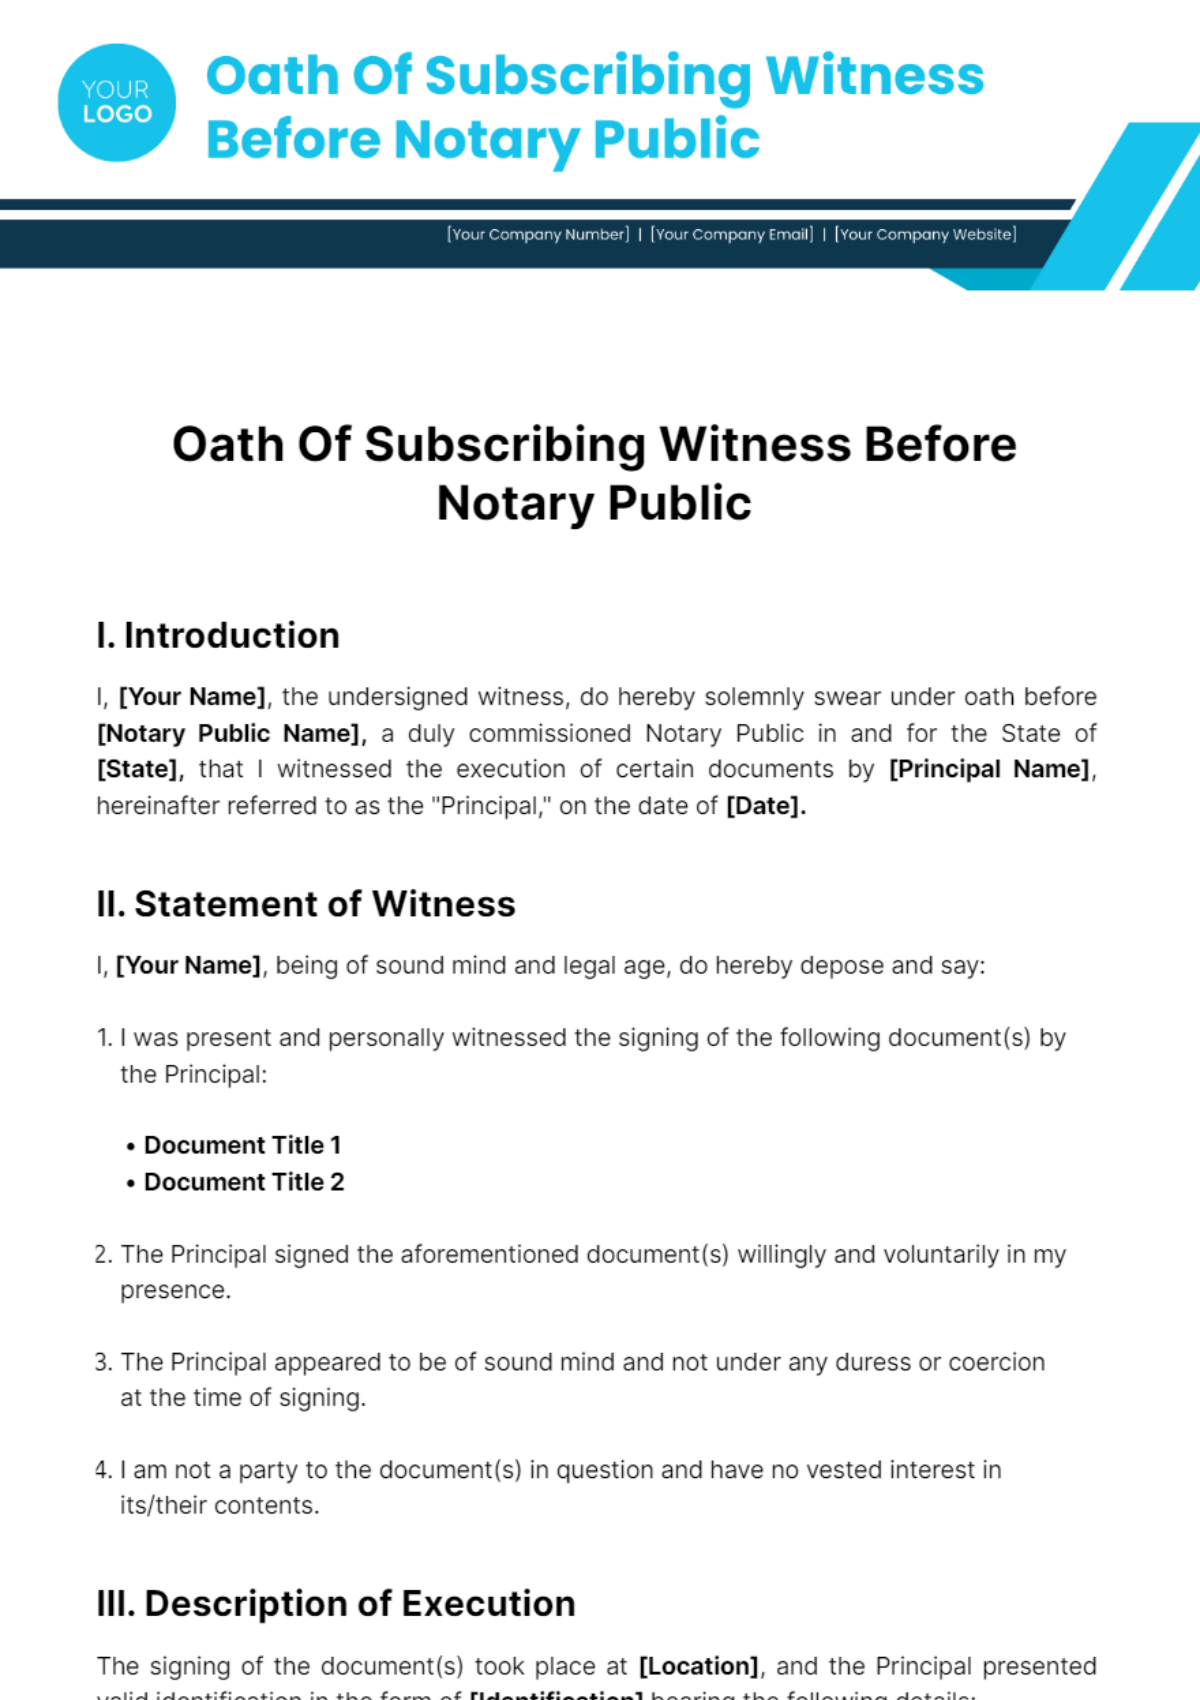 Free Oath Of Subscribing Witness Before Notary Public Template